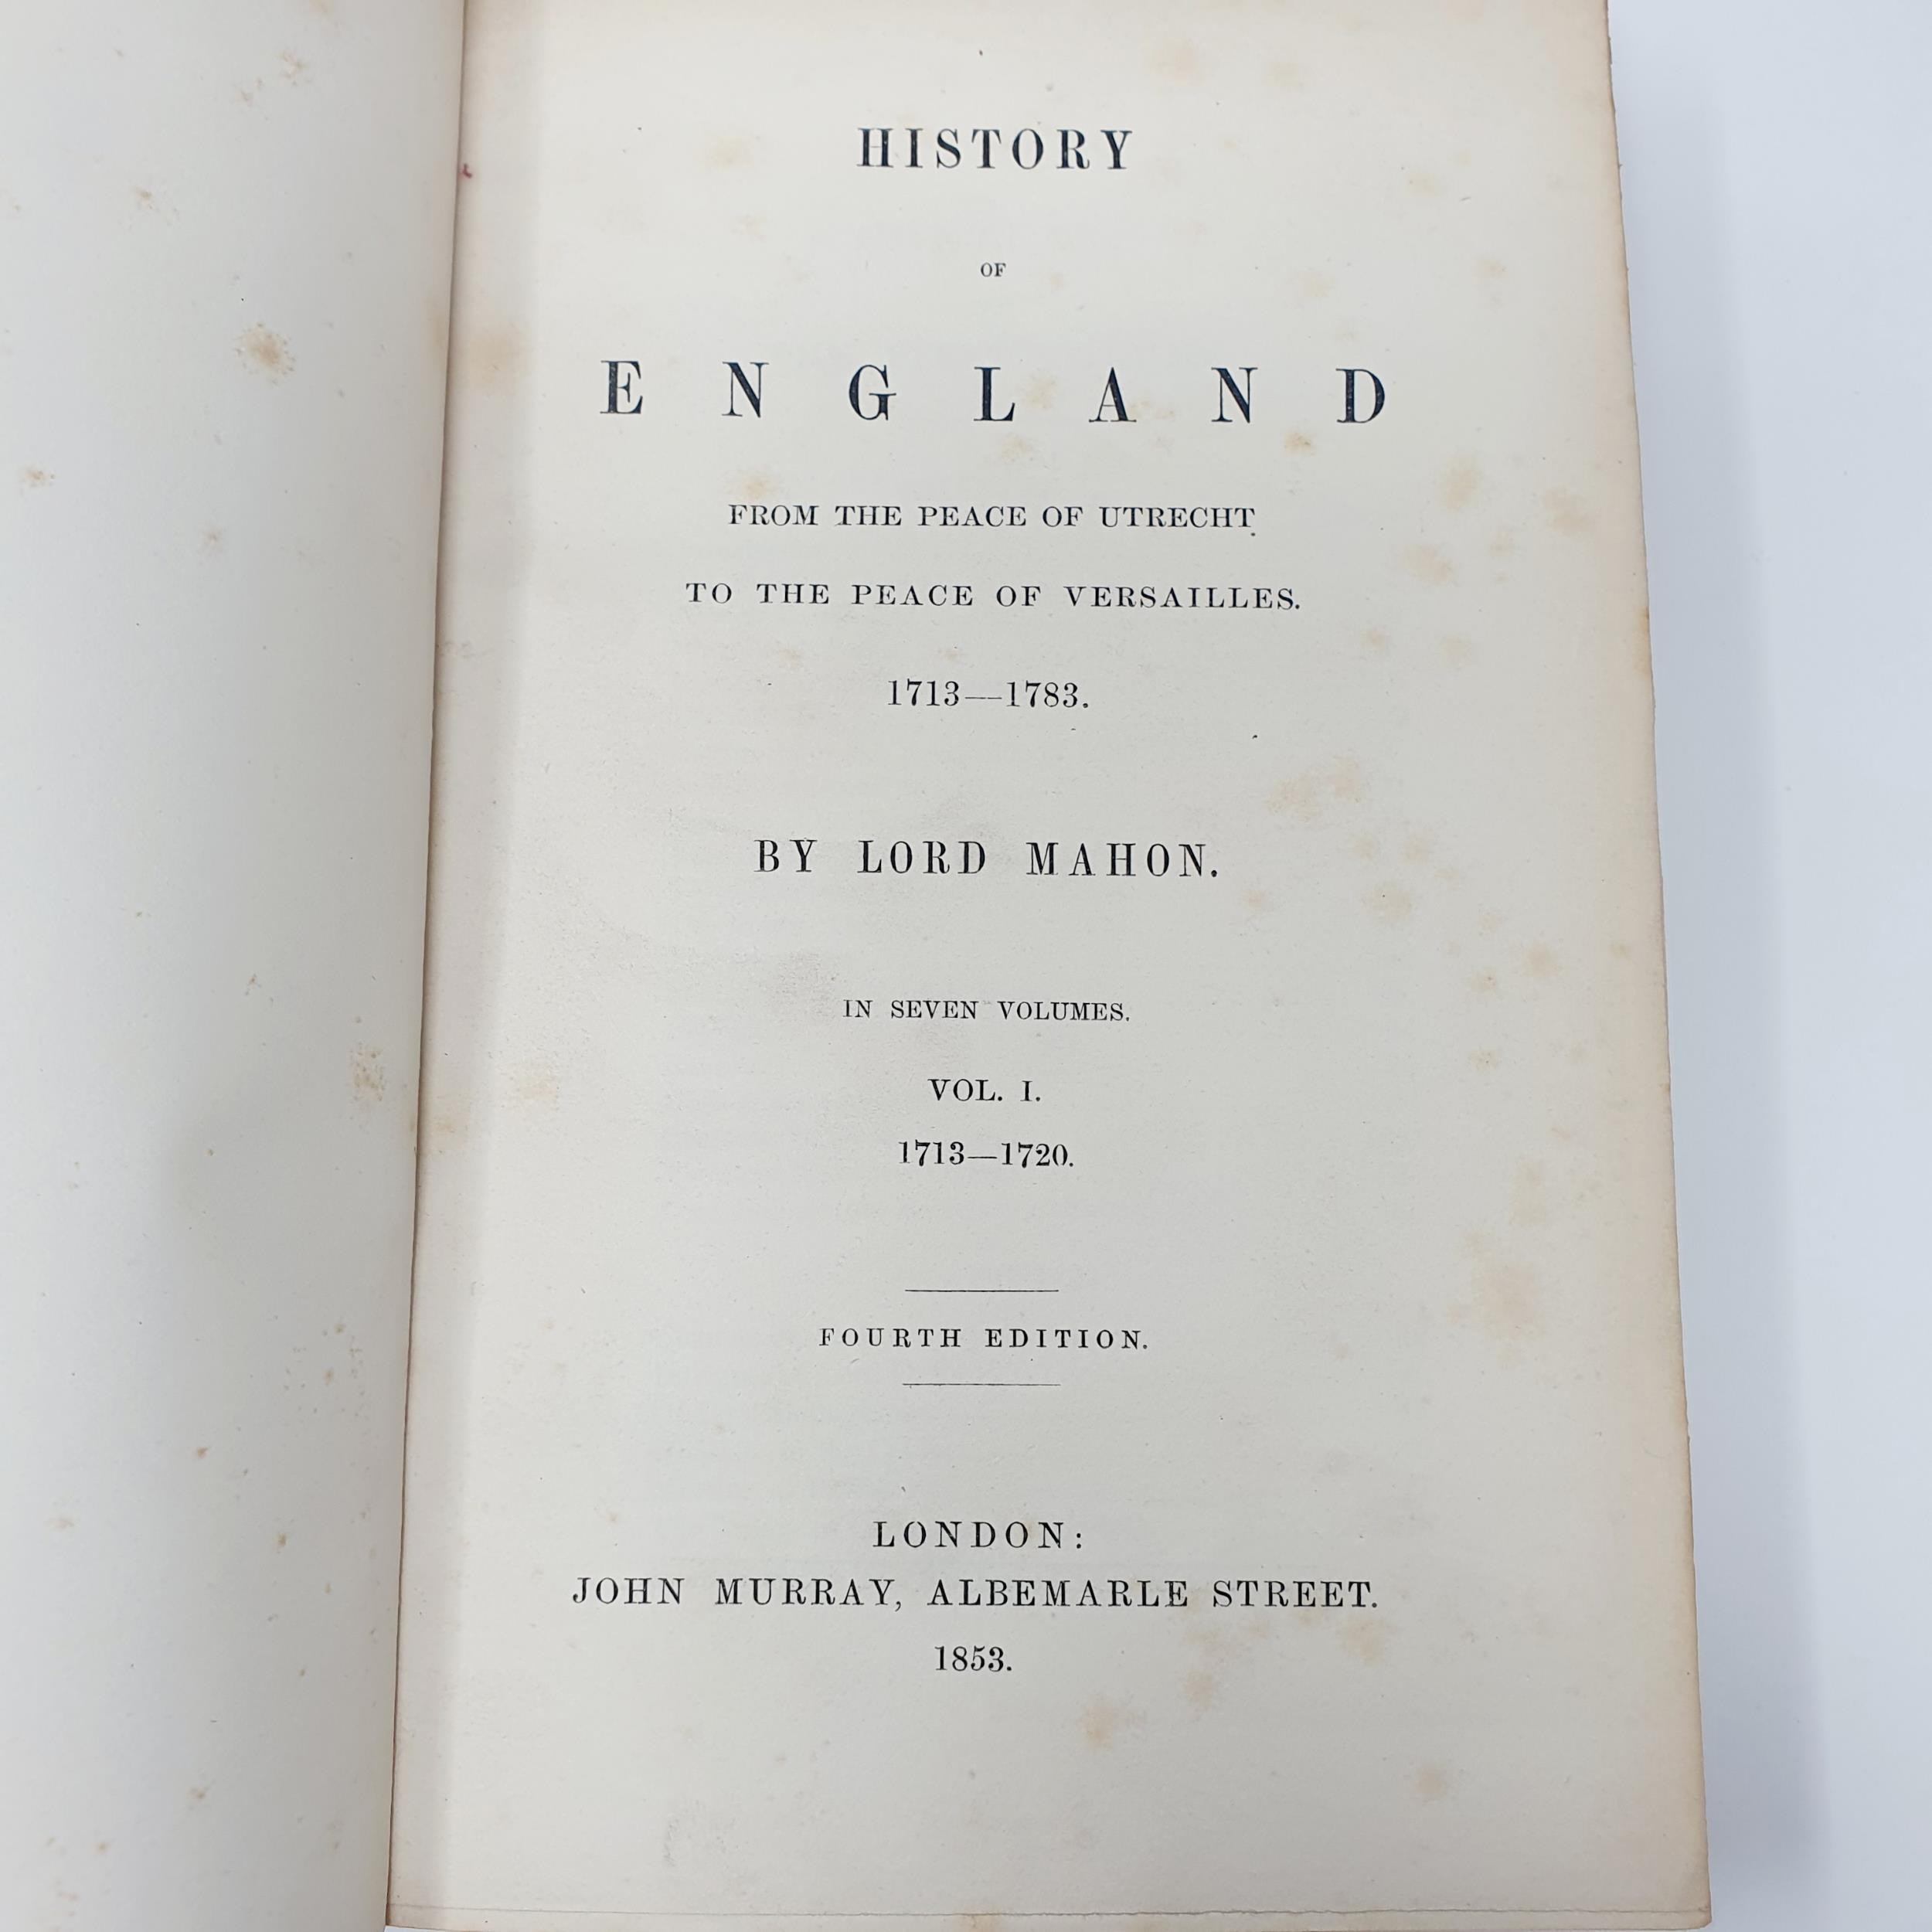 Ingoldsby (Thomas), The Ingoldsby Legends, 3 vols., and Stanhope (Earl), History Of England, 7 vols. - Image 3 of 4